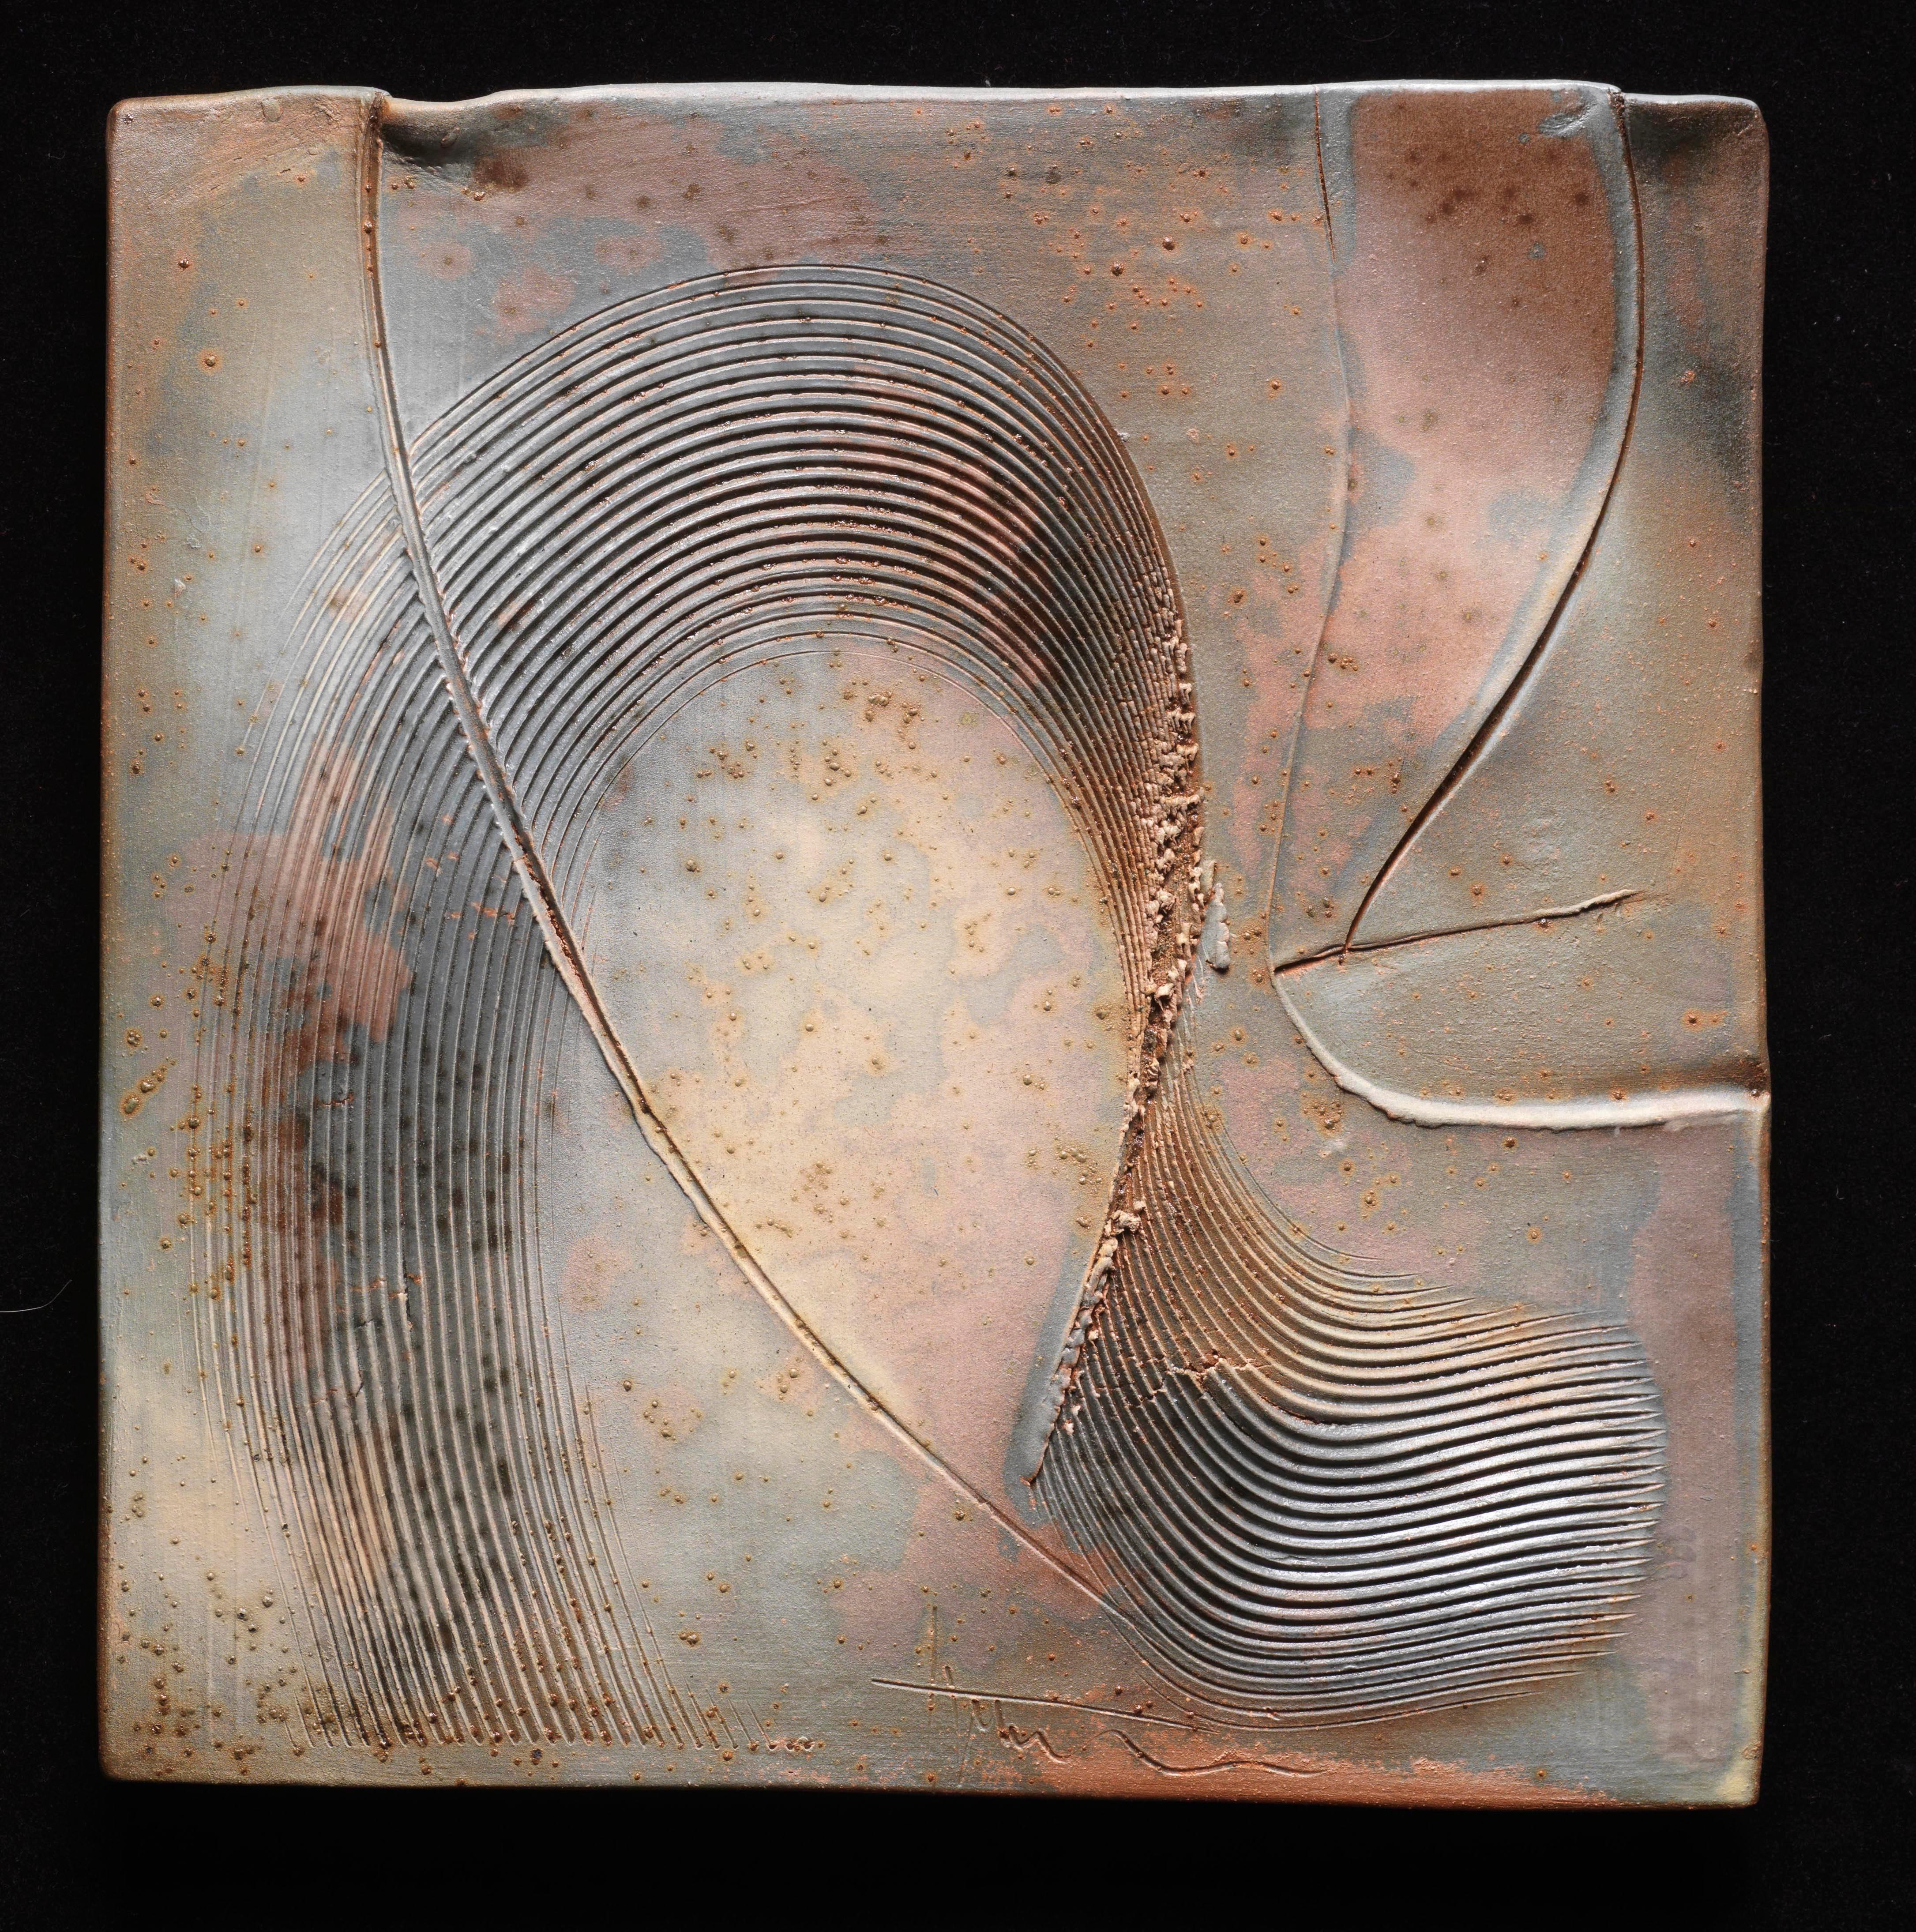 Neil Tetkowski Abstract Sculpture - Ceramic Texture Square Sculpture Abstract Wall Earth